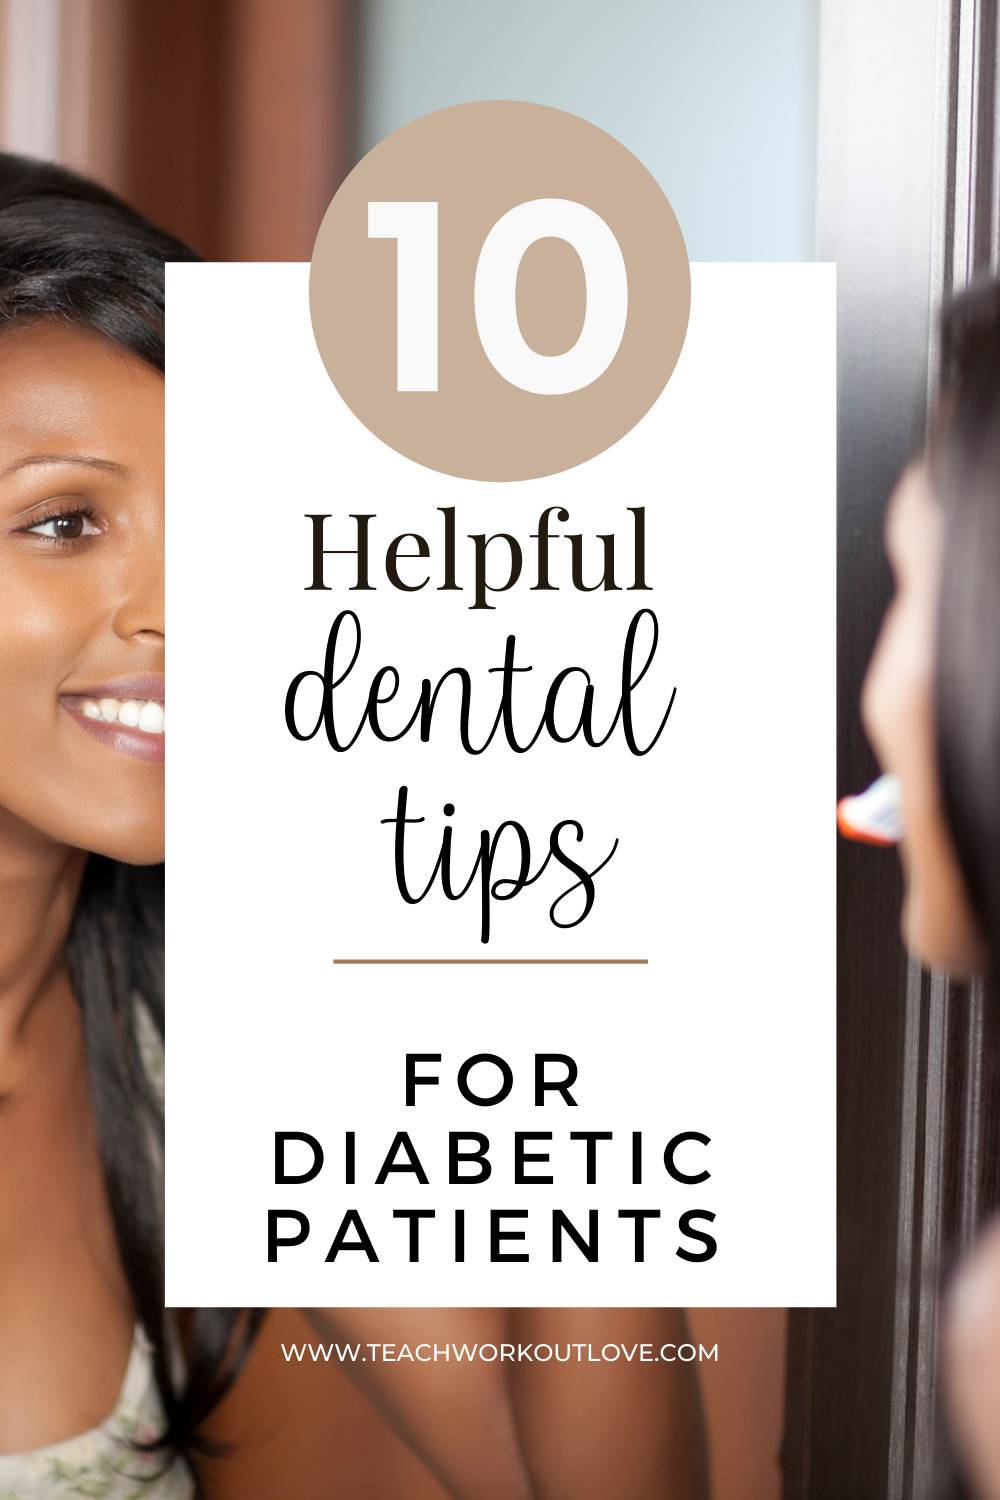 Diabetes increases the risk of oral diseases. Here are top 10 dental tips for diabetic patients to keep a check on their oral health.